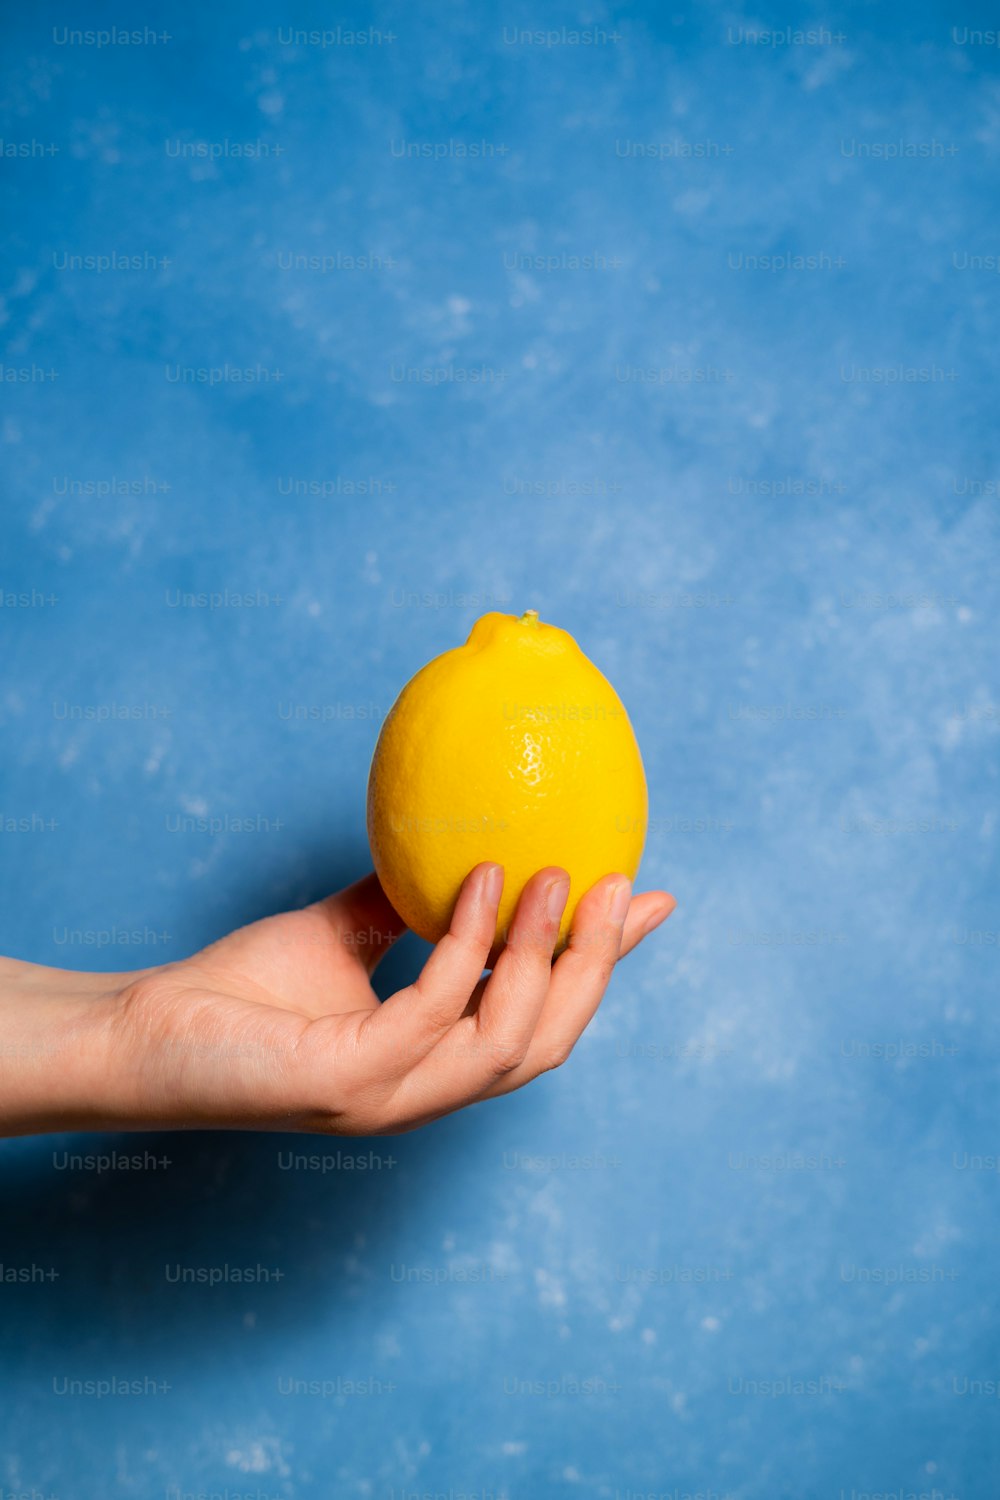 a person holding an orange in their hand